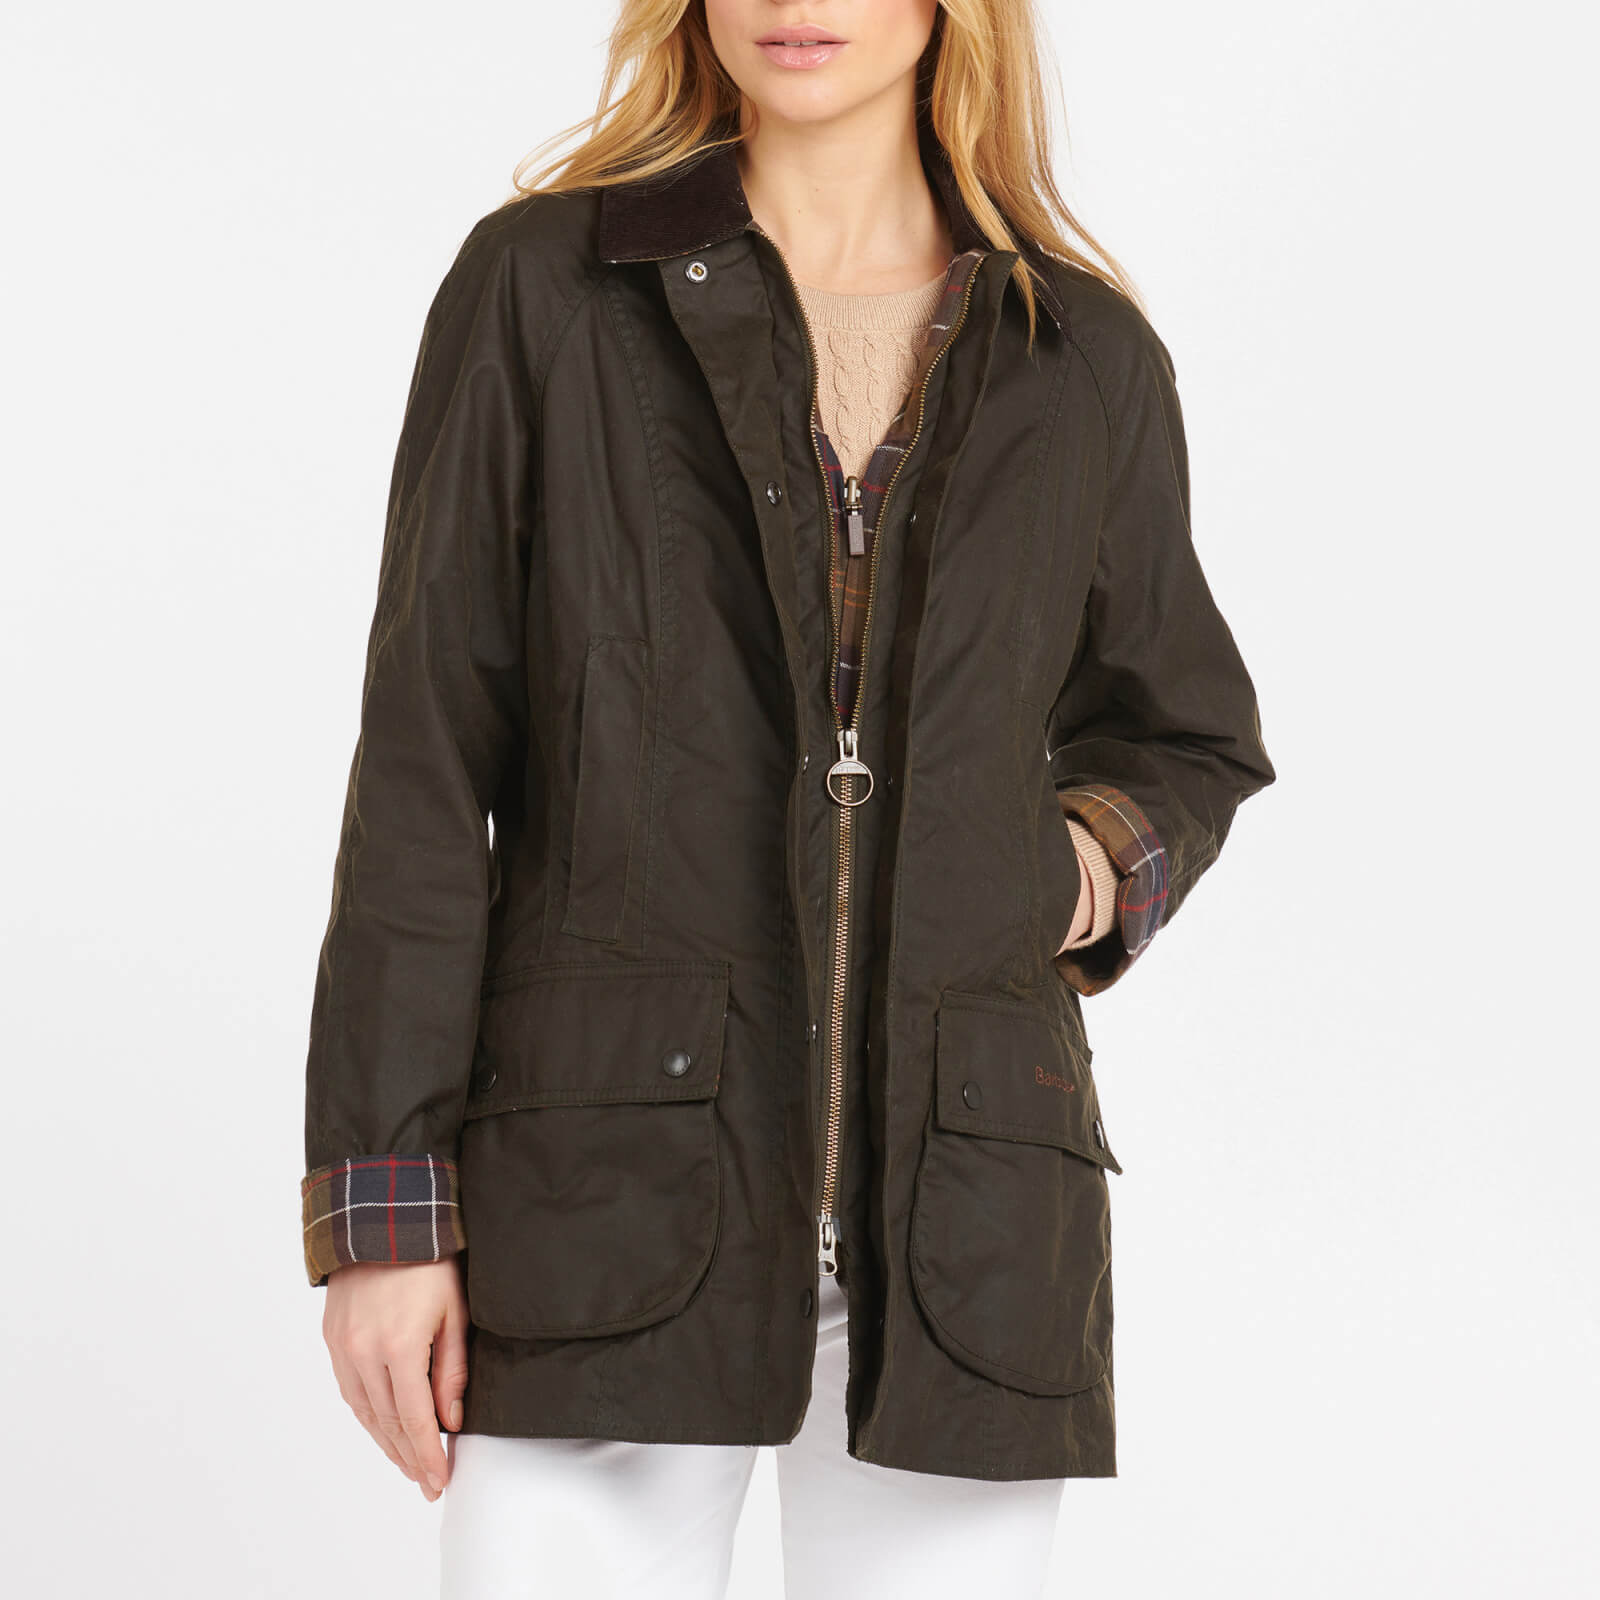 Barbour Women's Beadnell Wax Jacket - Olive - UK 16